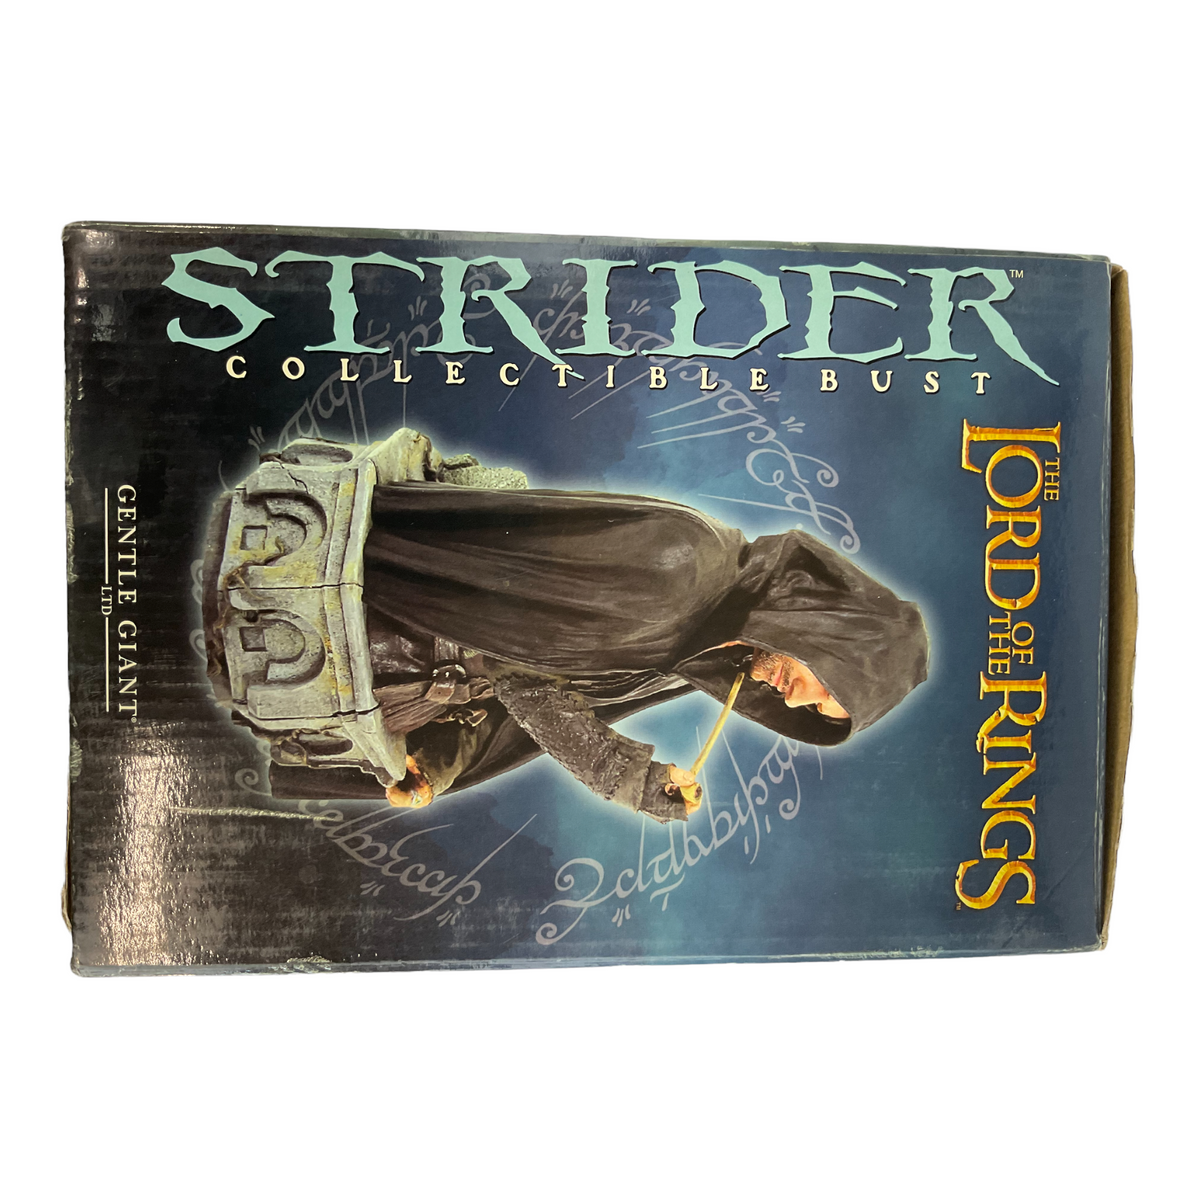 Lord of the Rings: Strider Ringbearer Mini Bust by Gentle Giant